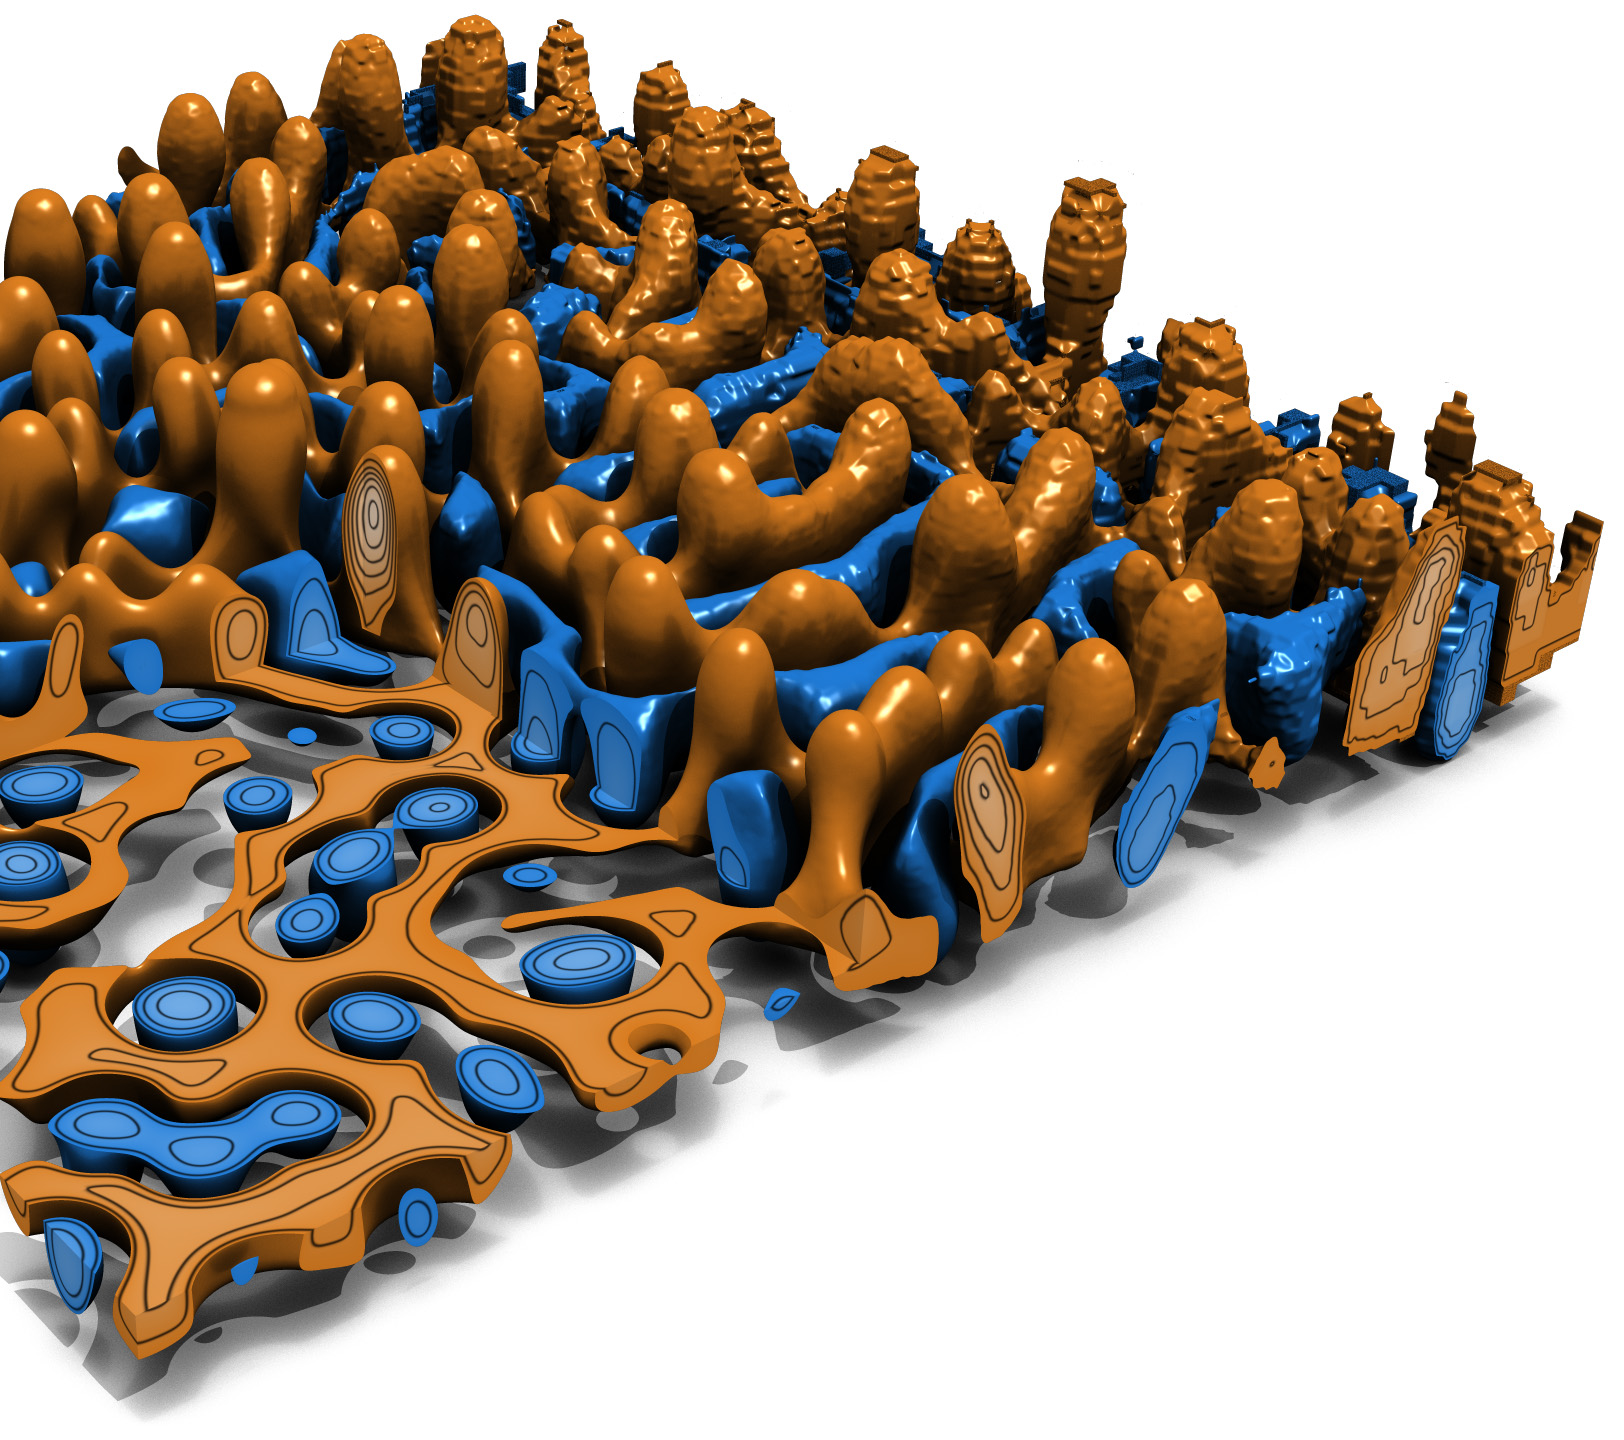 Computer simulation of blue and brown shapes with varying heights and degrees of smoothness